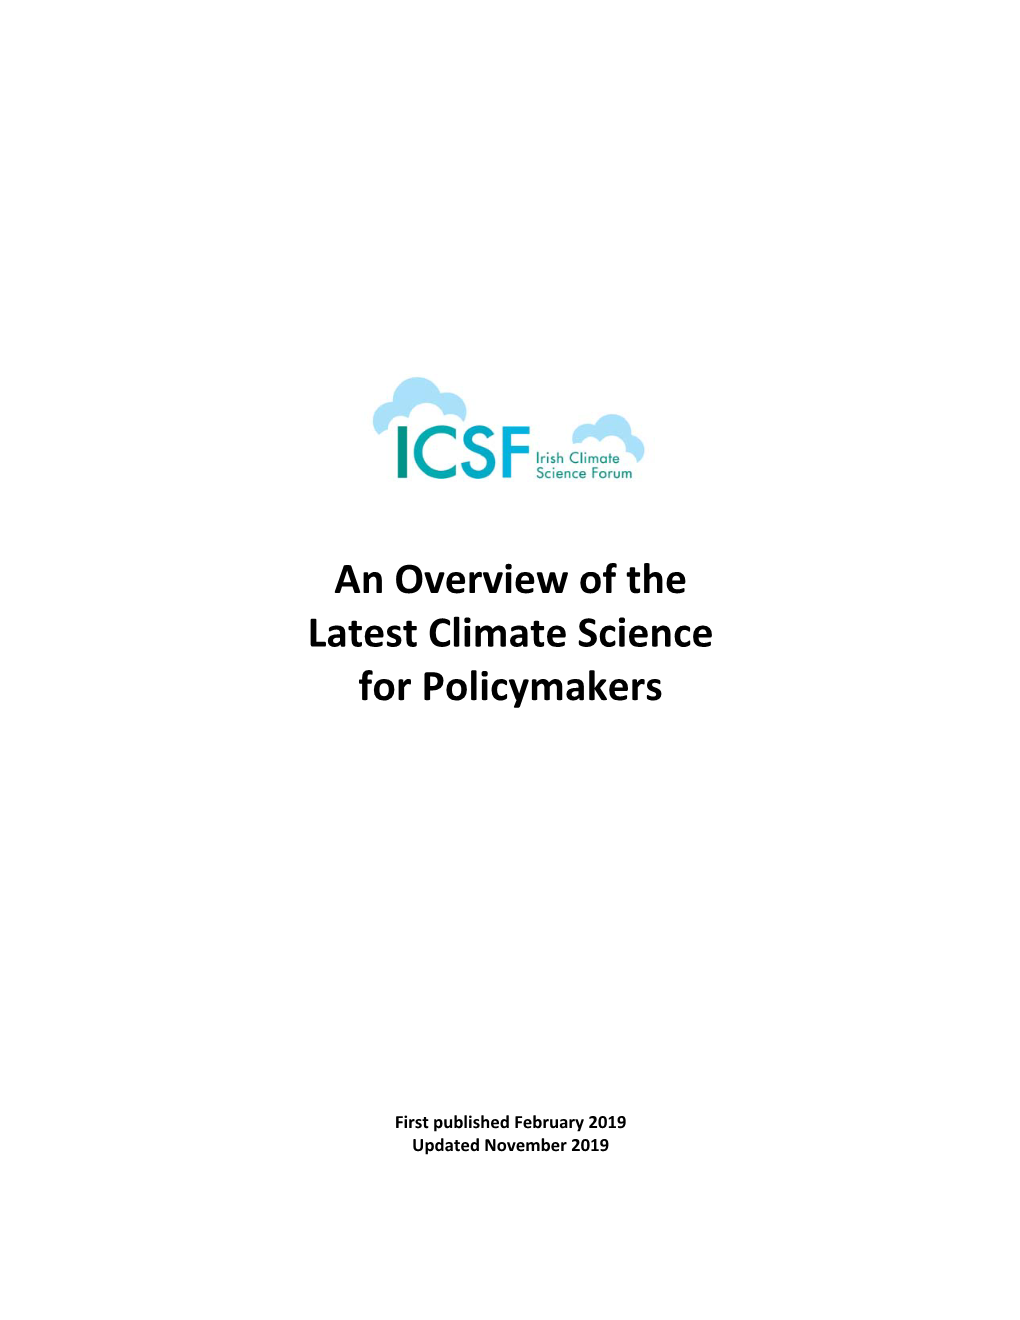 An Overview of the Latest Climate Science for Policymakers